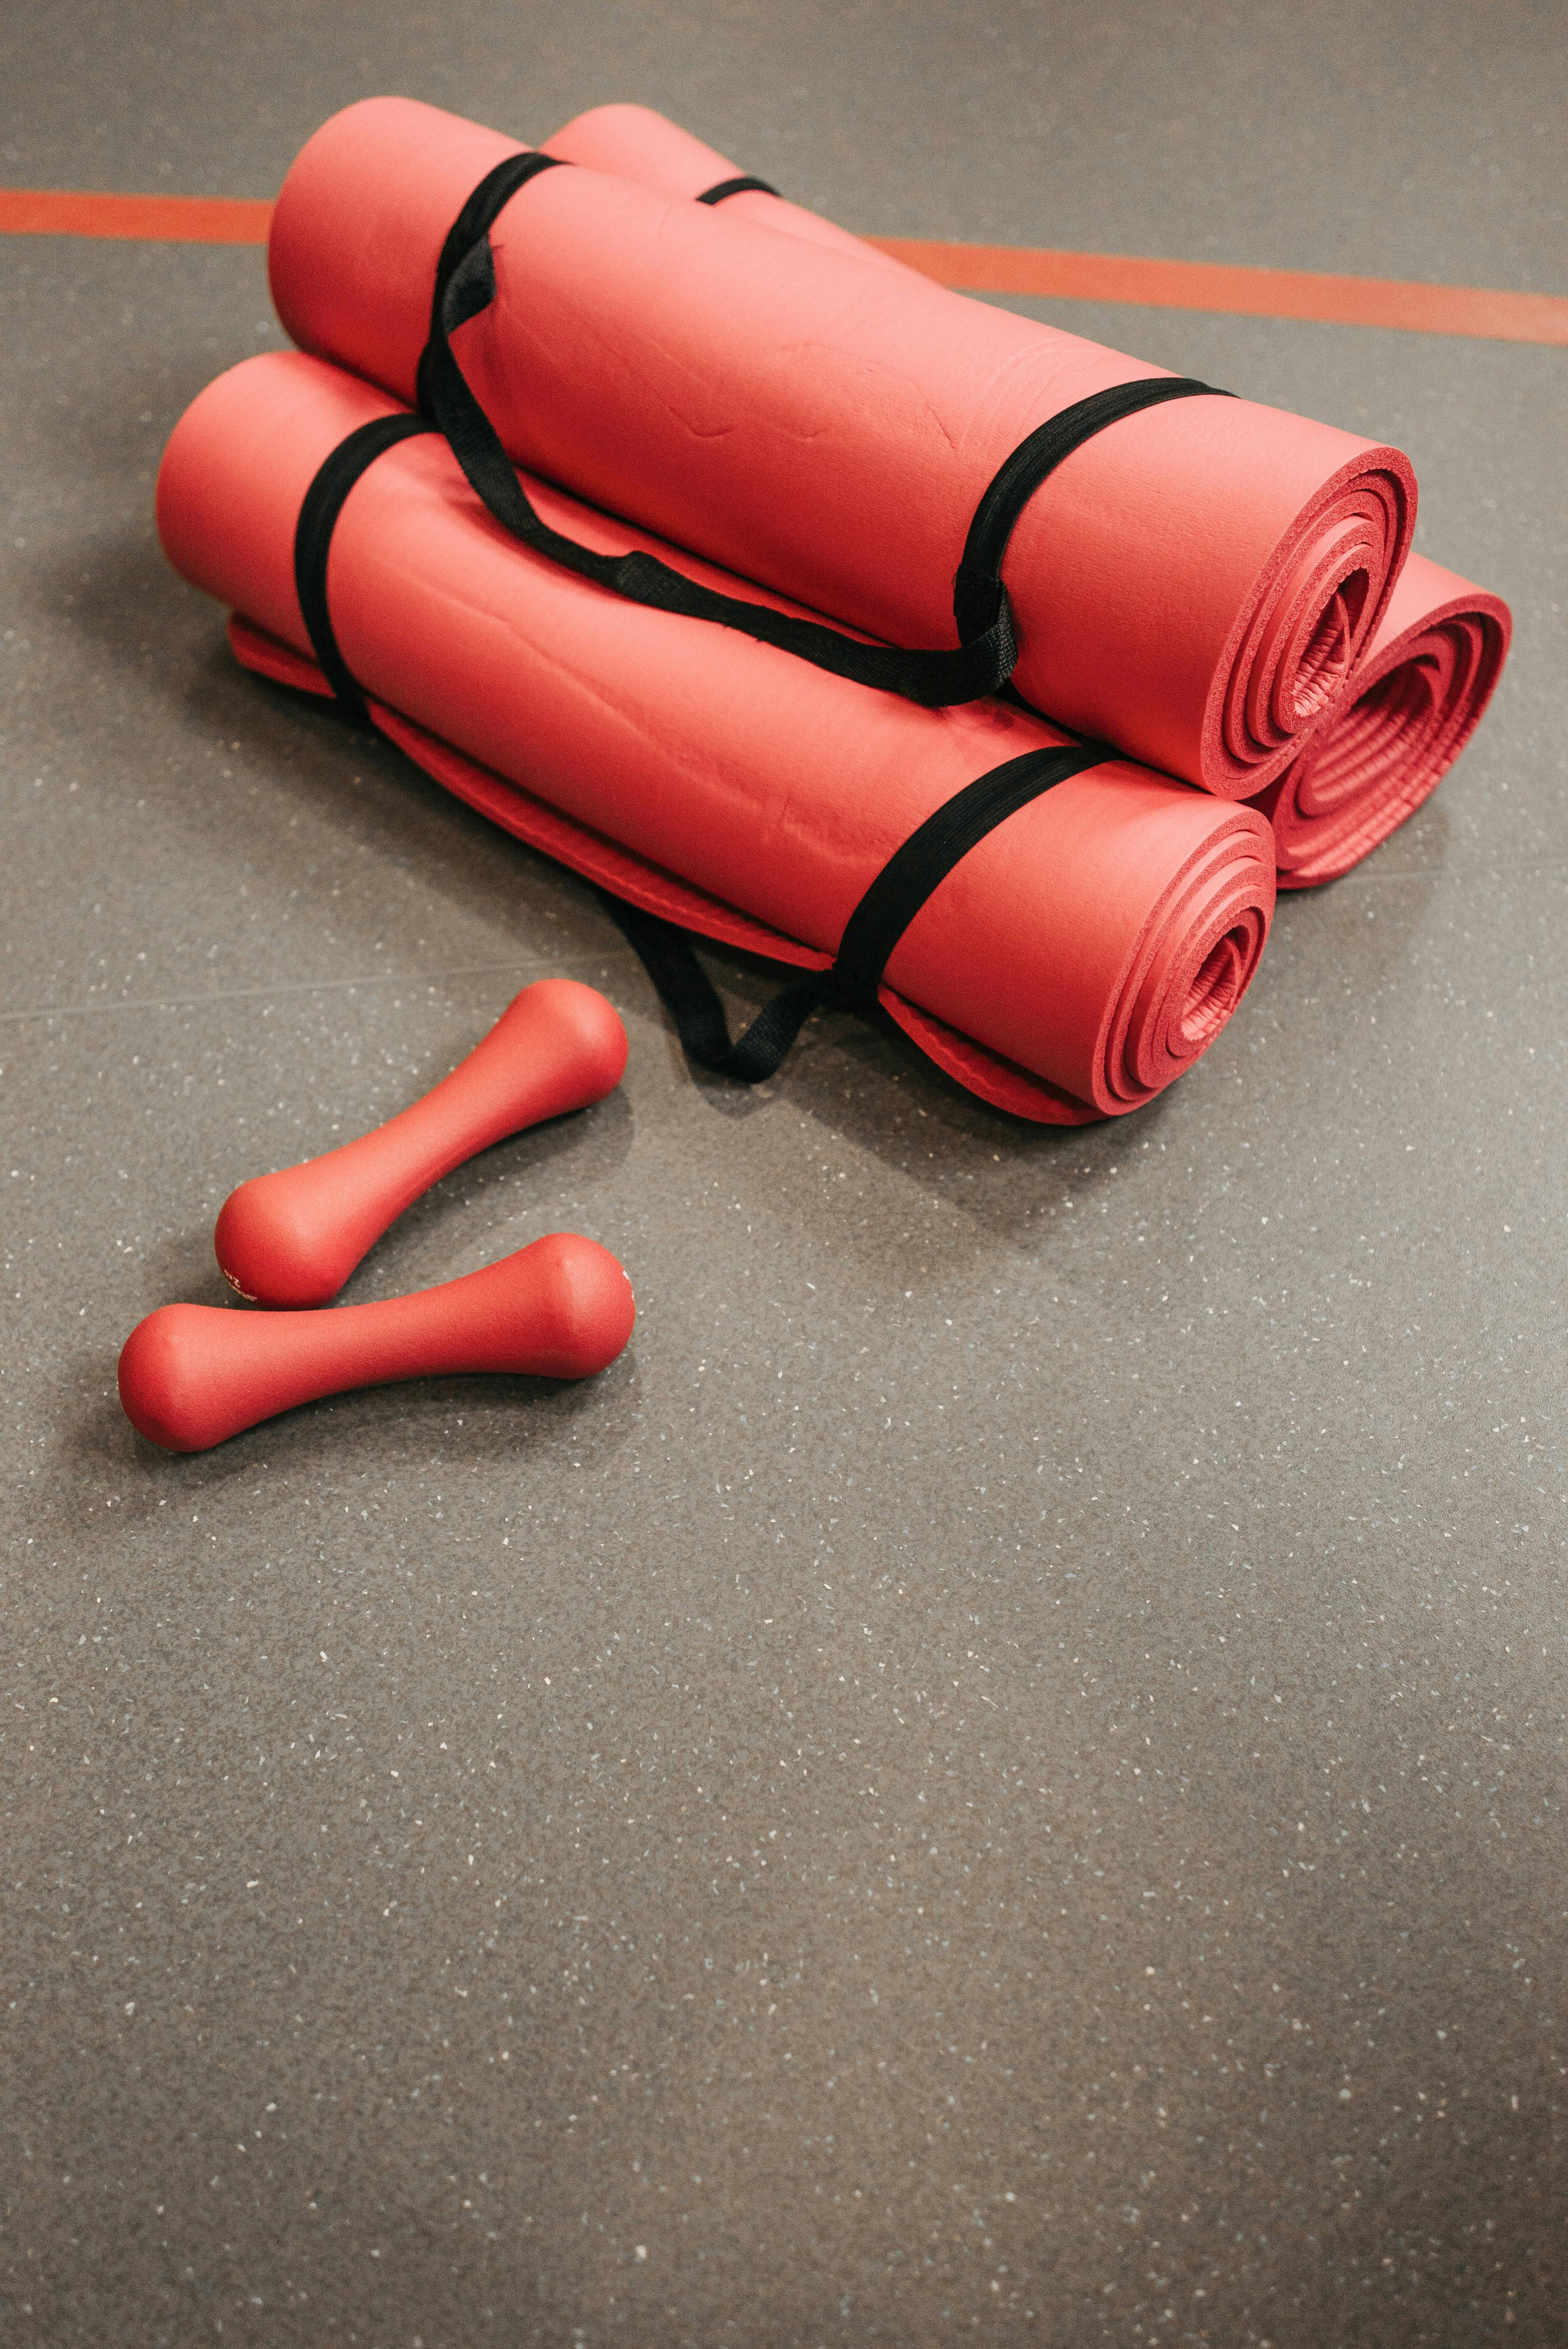 Yoga mat and dumbbells - Stock Image - F027/0691 - Science Photo Library